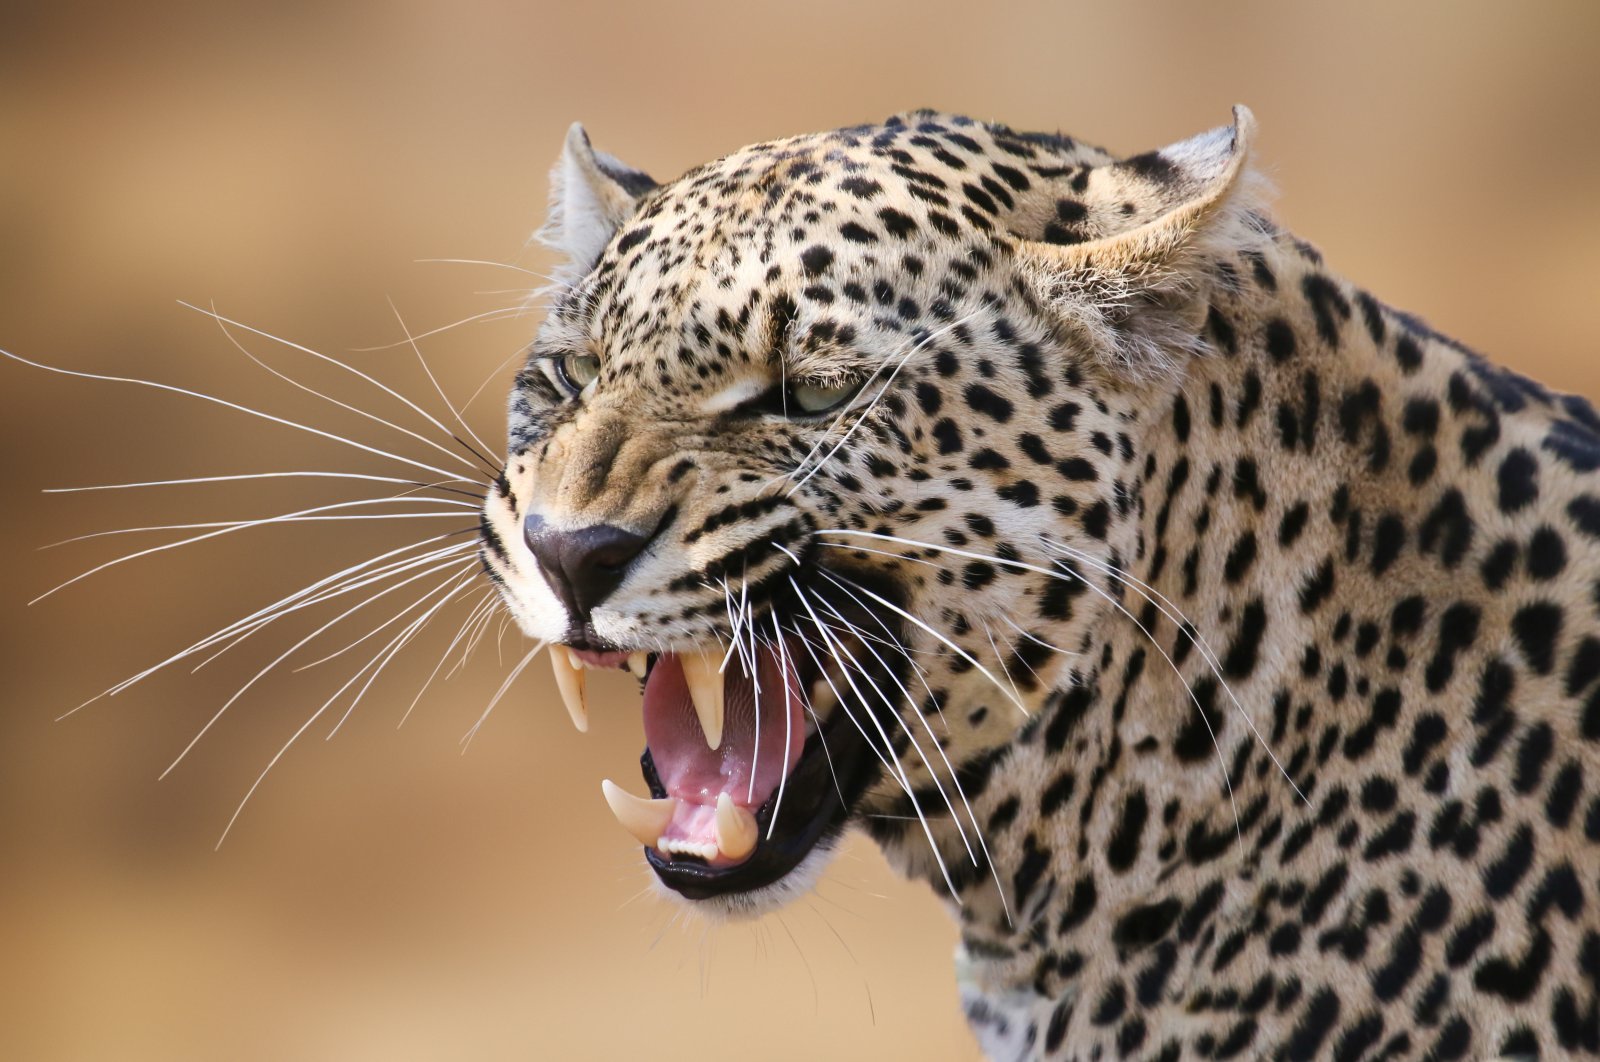 Birthday cake helps Indian brothers escape leopard. (Shutterstock Photo) 